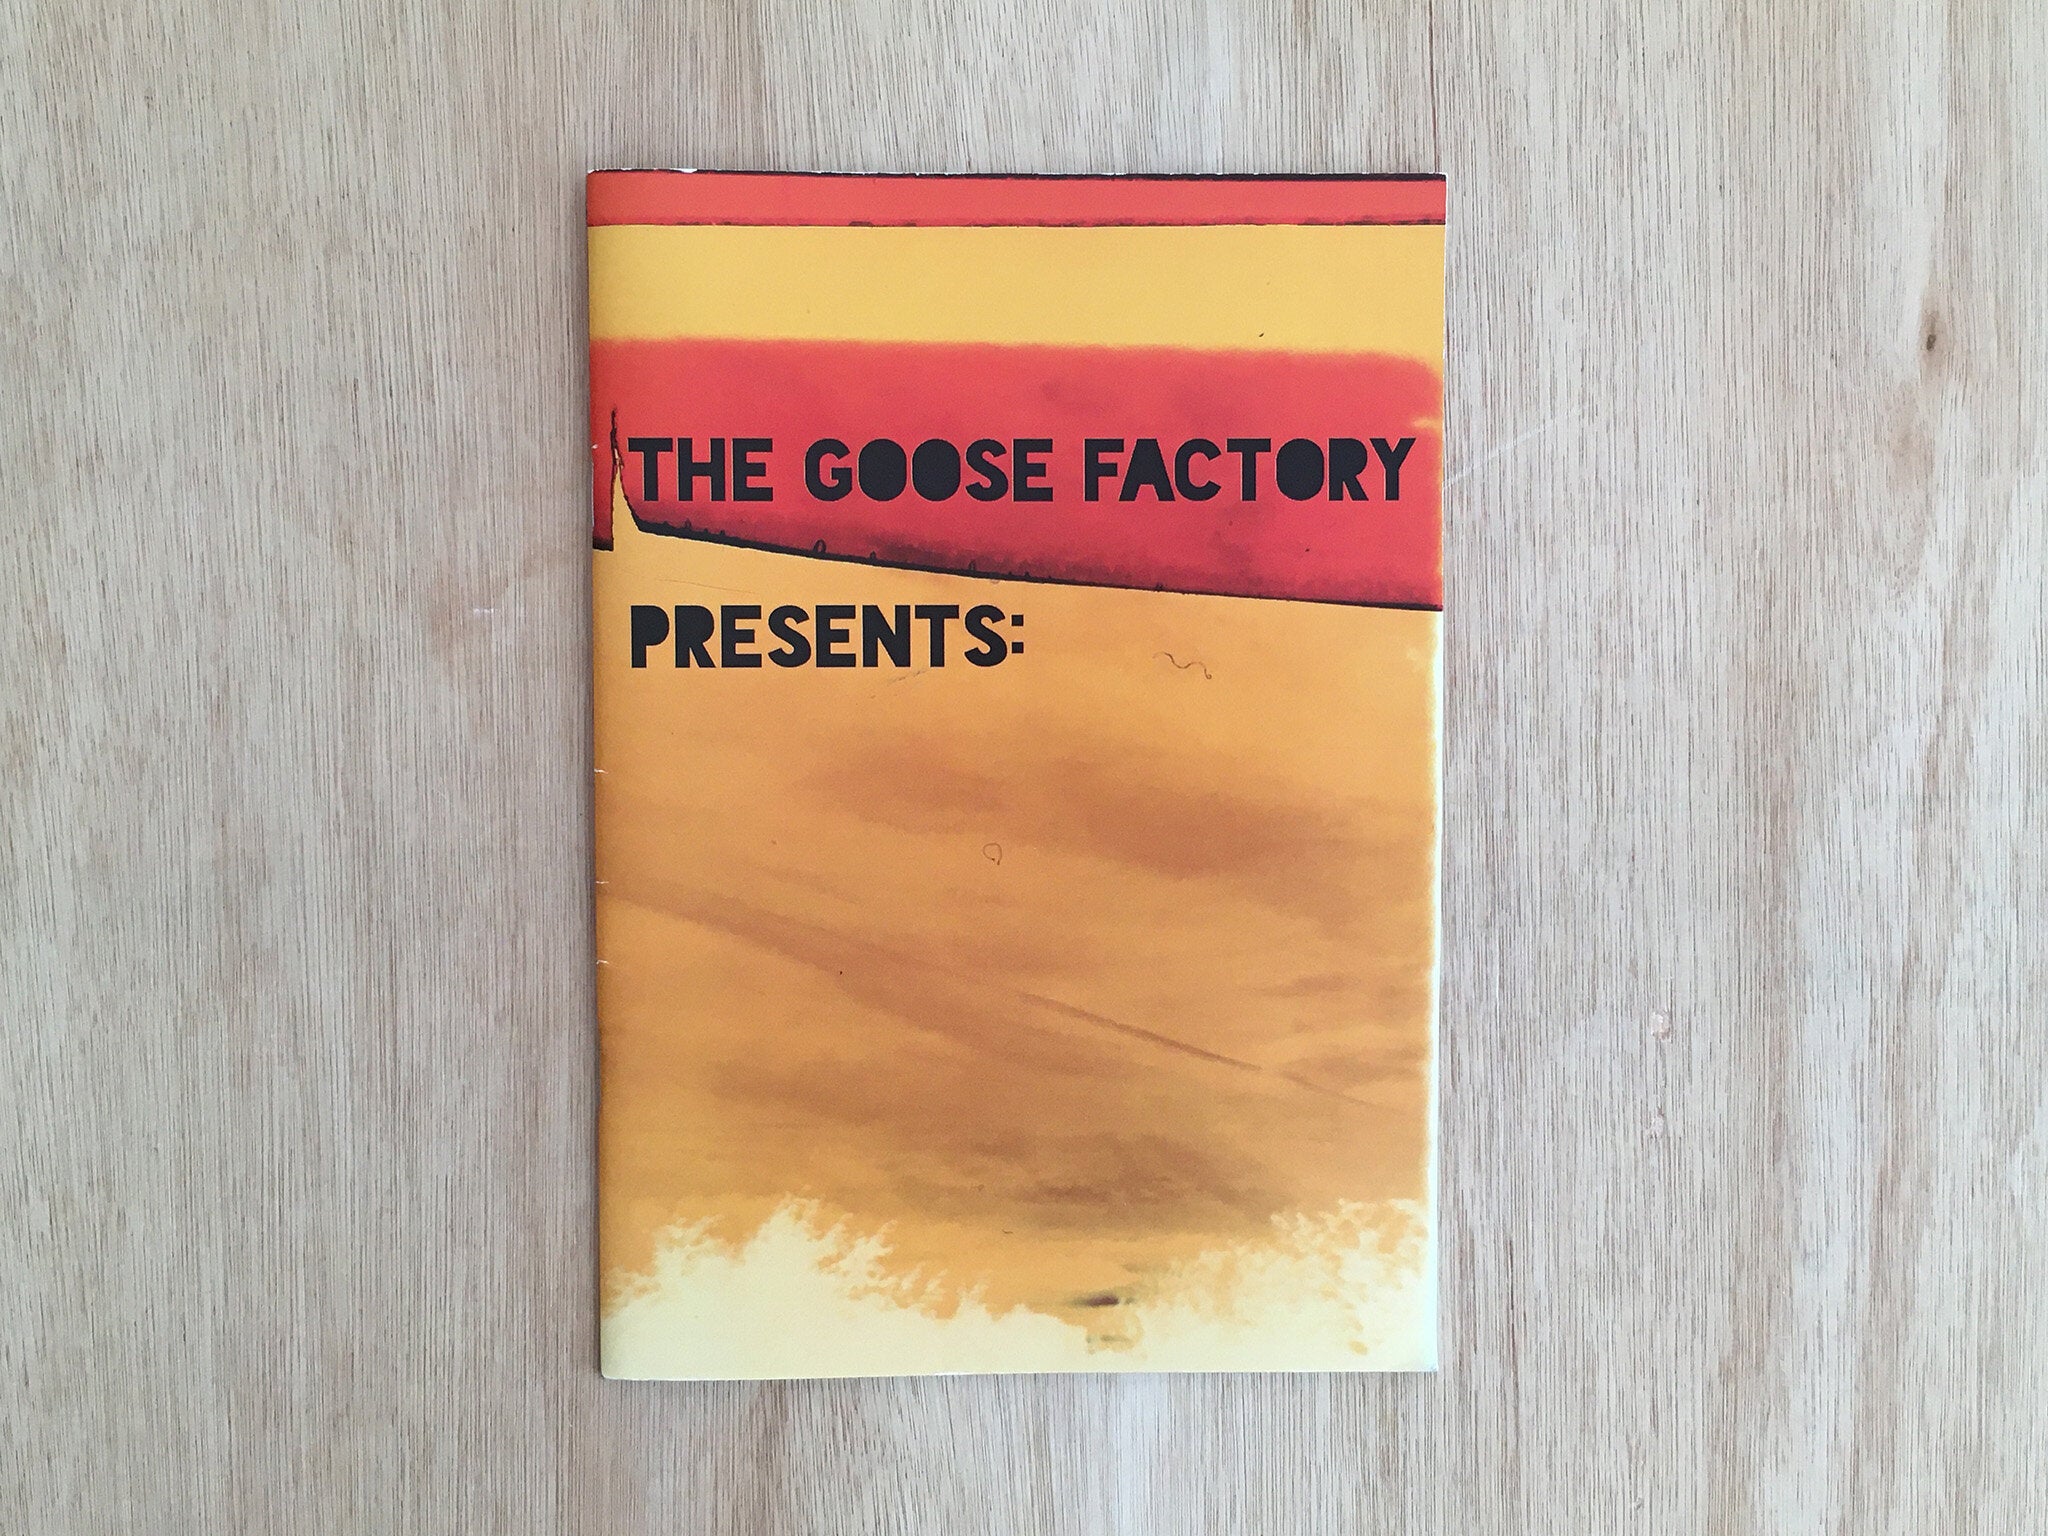 THE GOOSE FACTORY PRESENTS by Peter James Burns